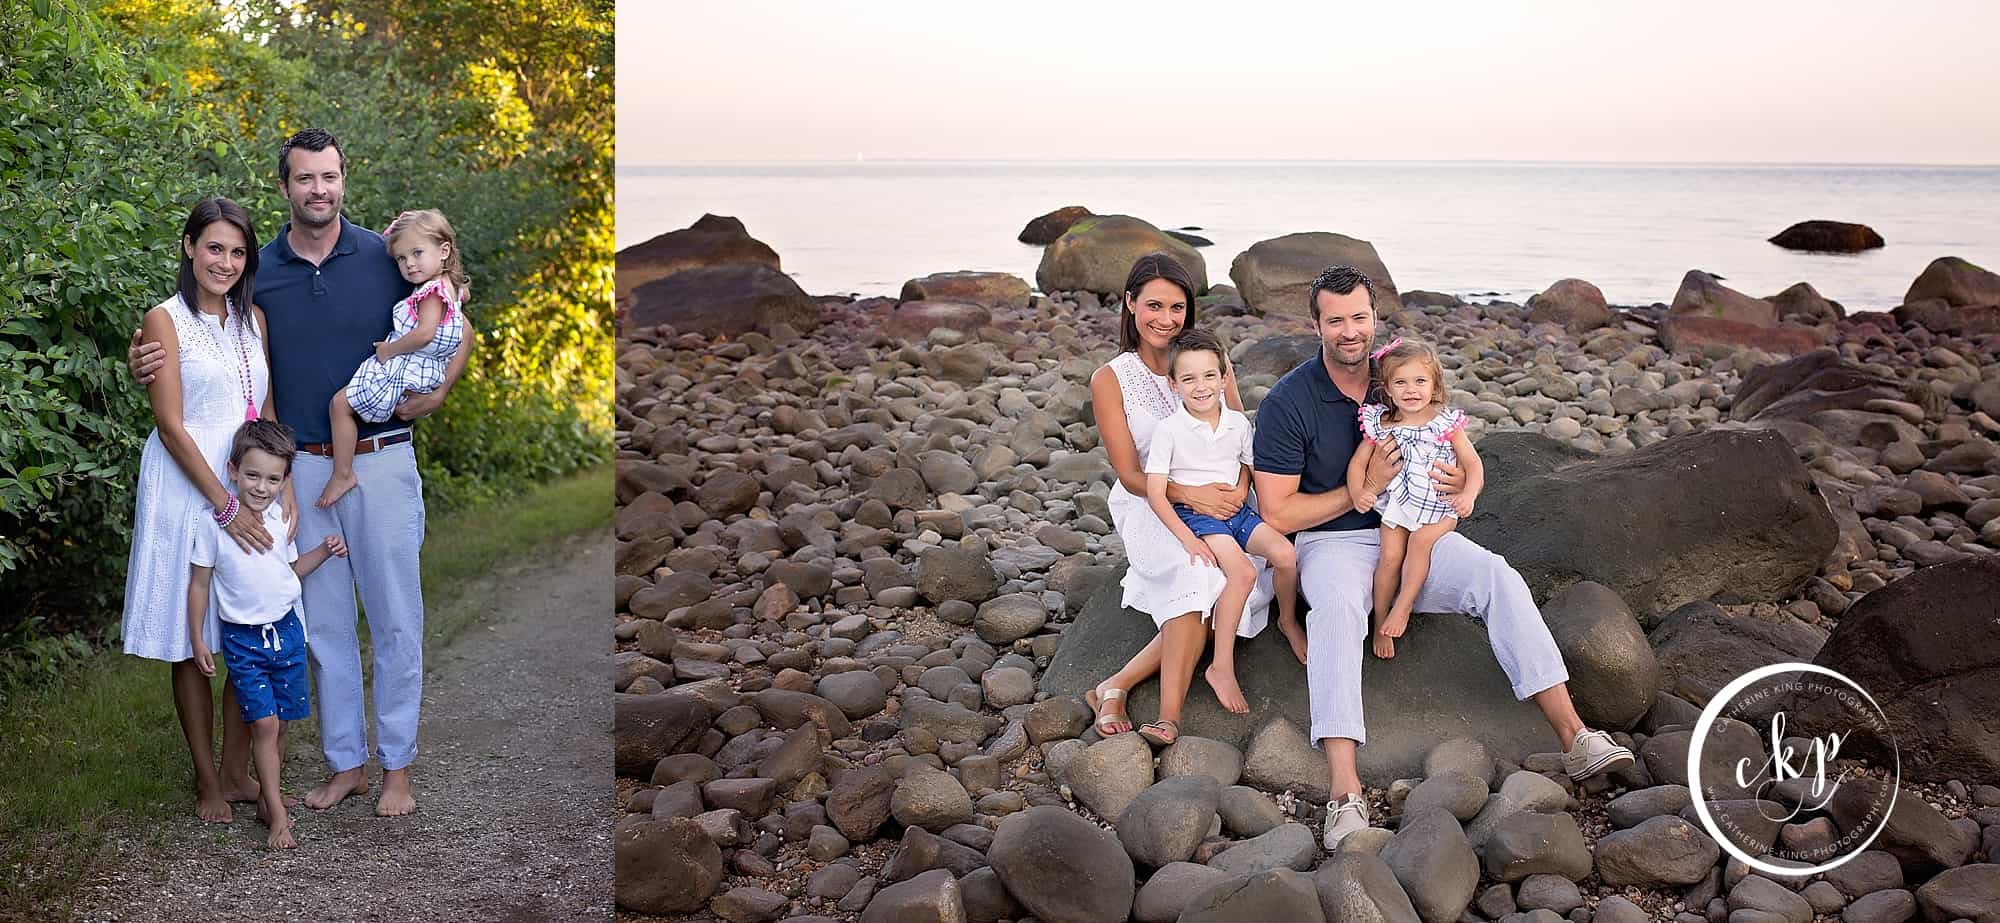 ct family photography shoreline beach photography sessions from 2017